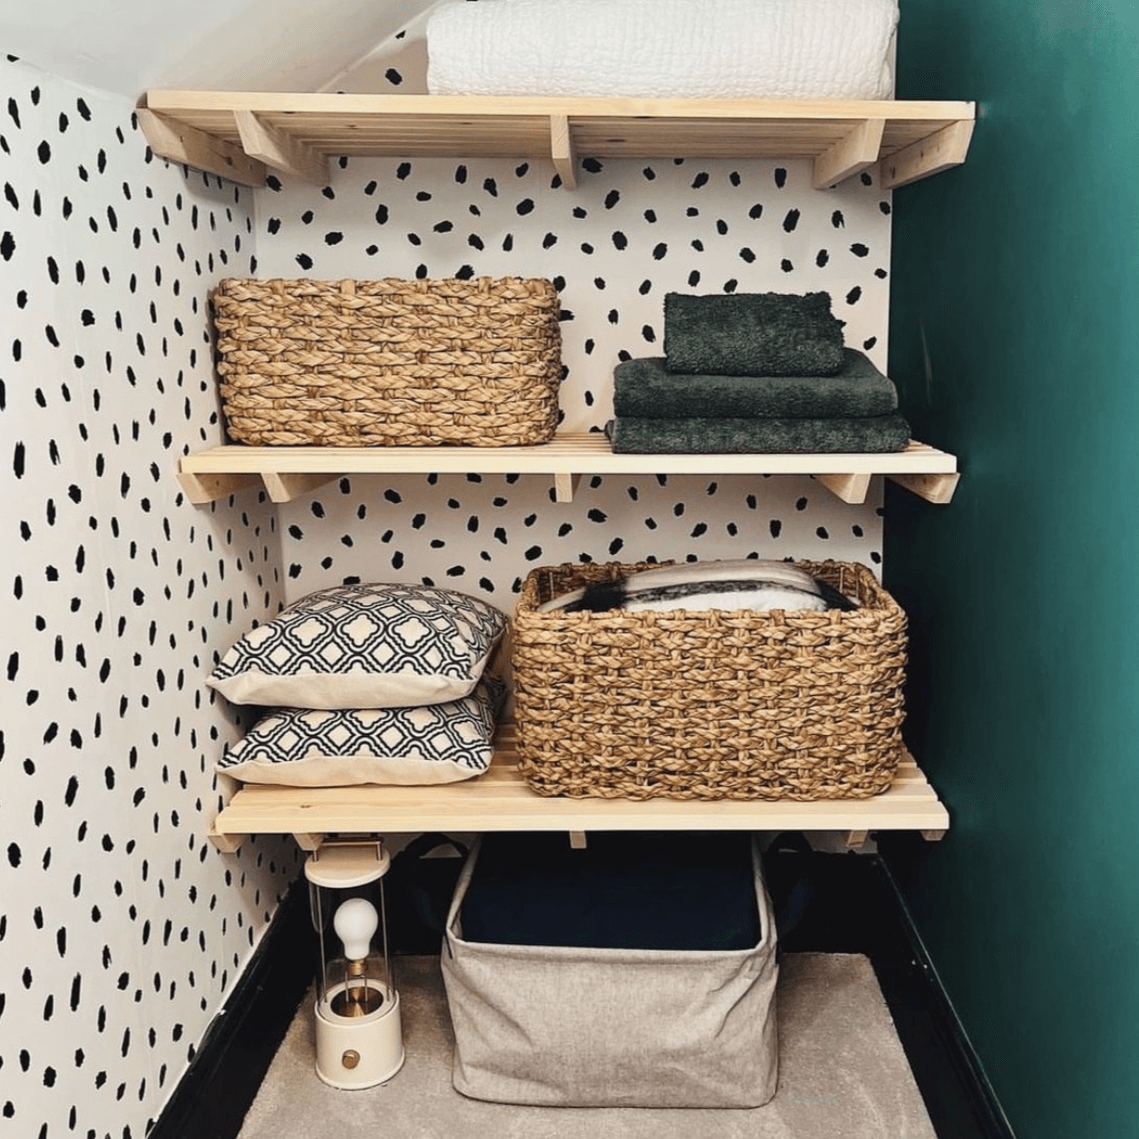 Airing Cupboard Wooden Slatted Shelves - 71 cm by 60 cm